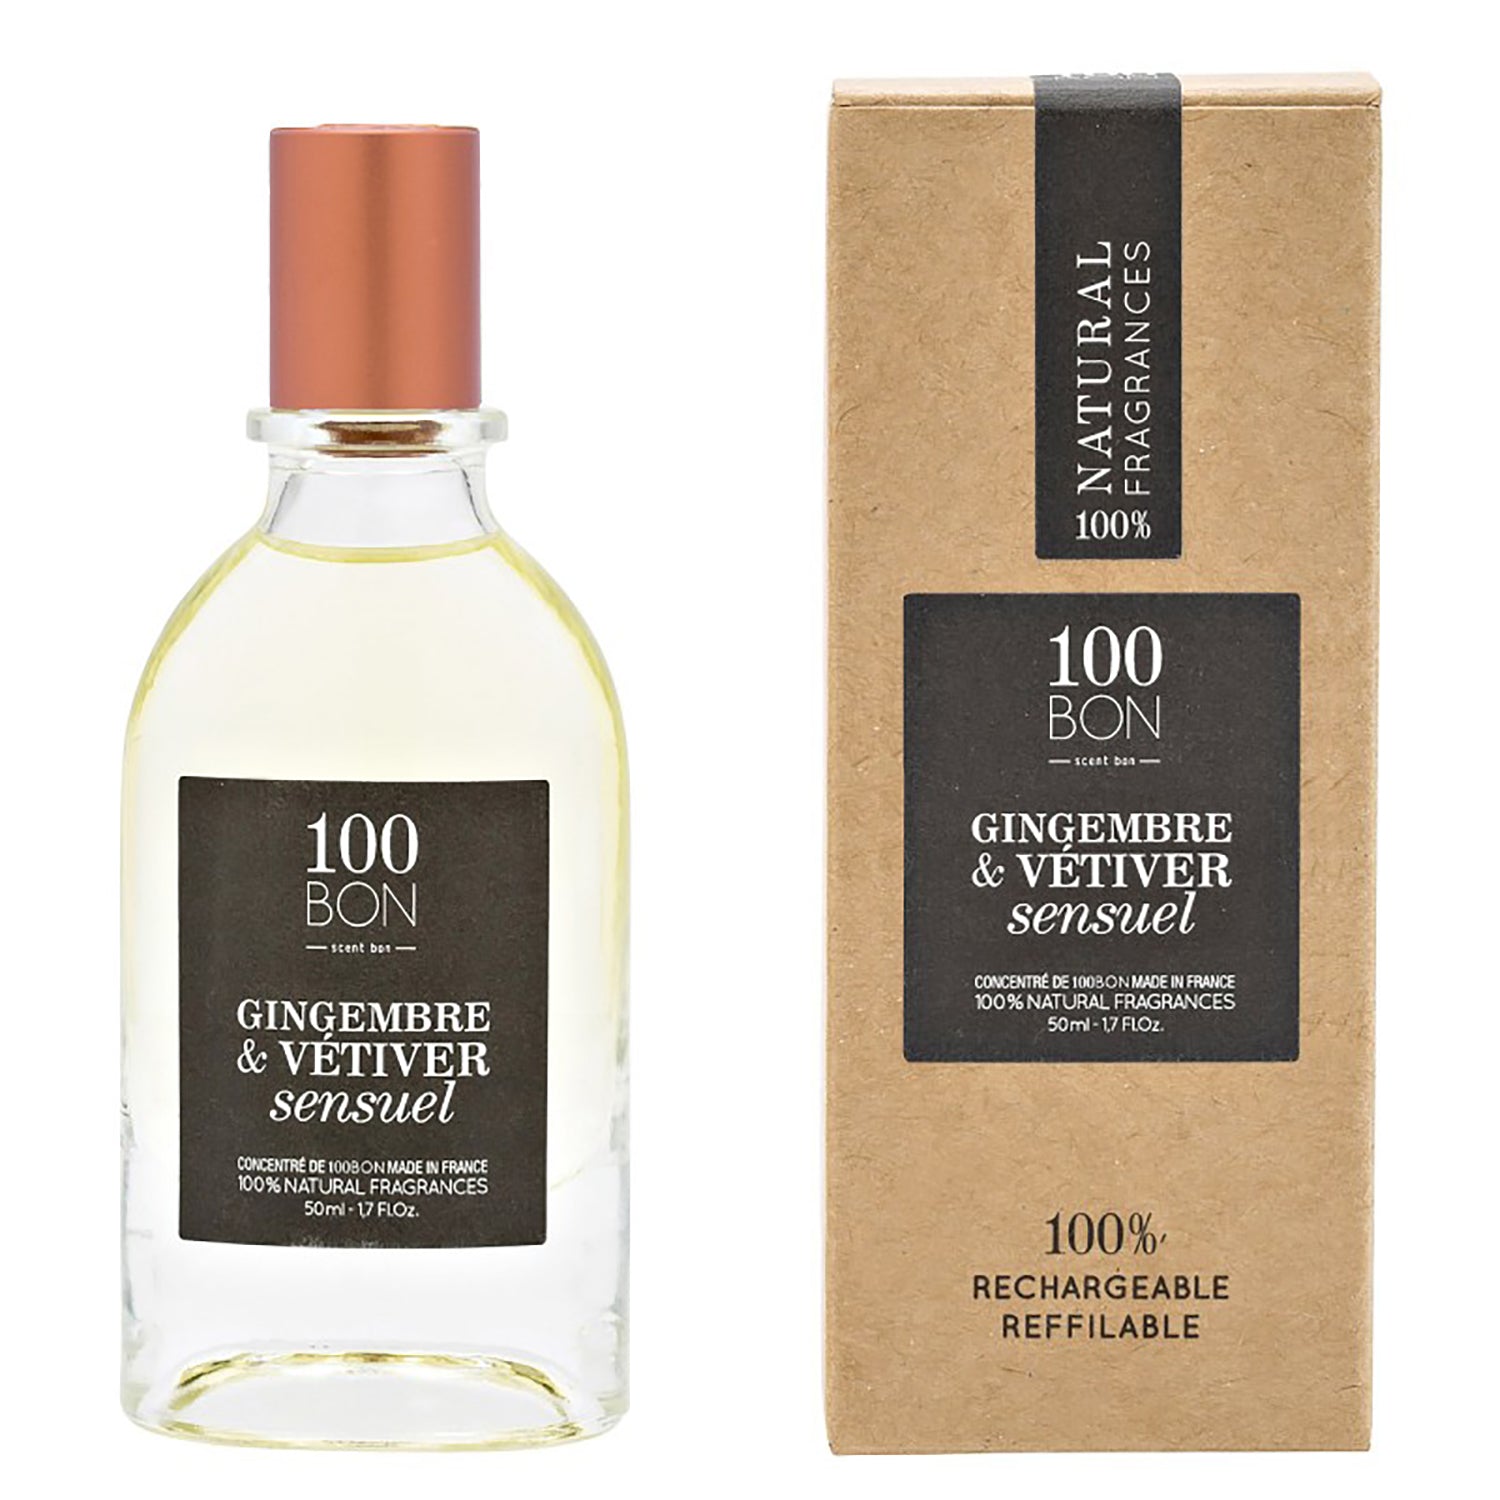 Gingembre & Vetiver Sensual 100% Natural Concentrate Fragrance Spray